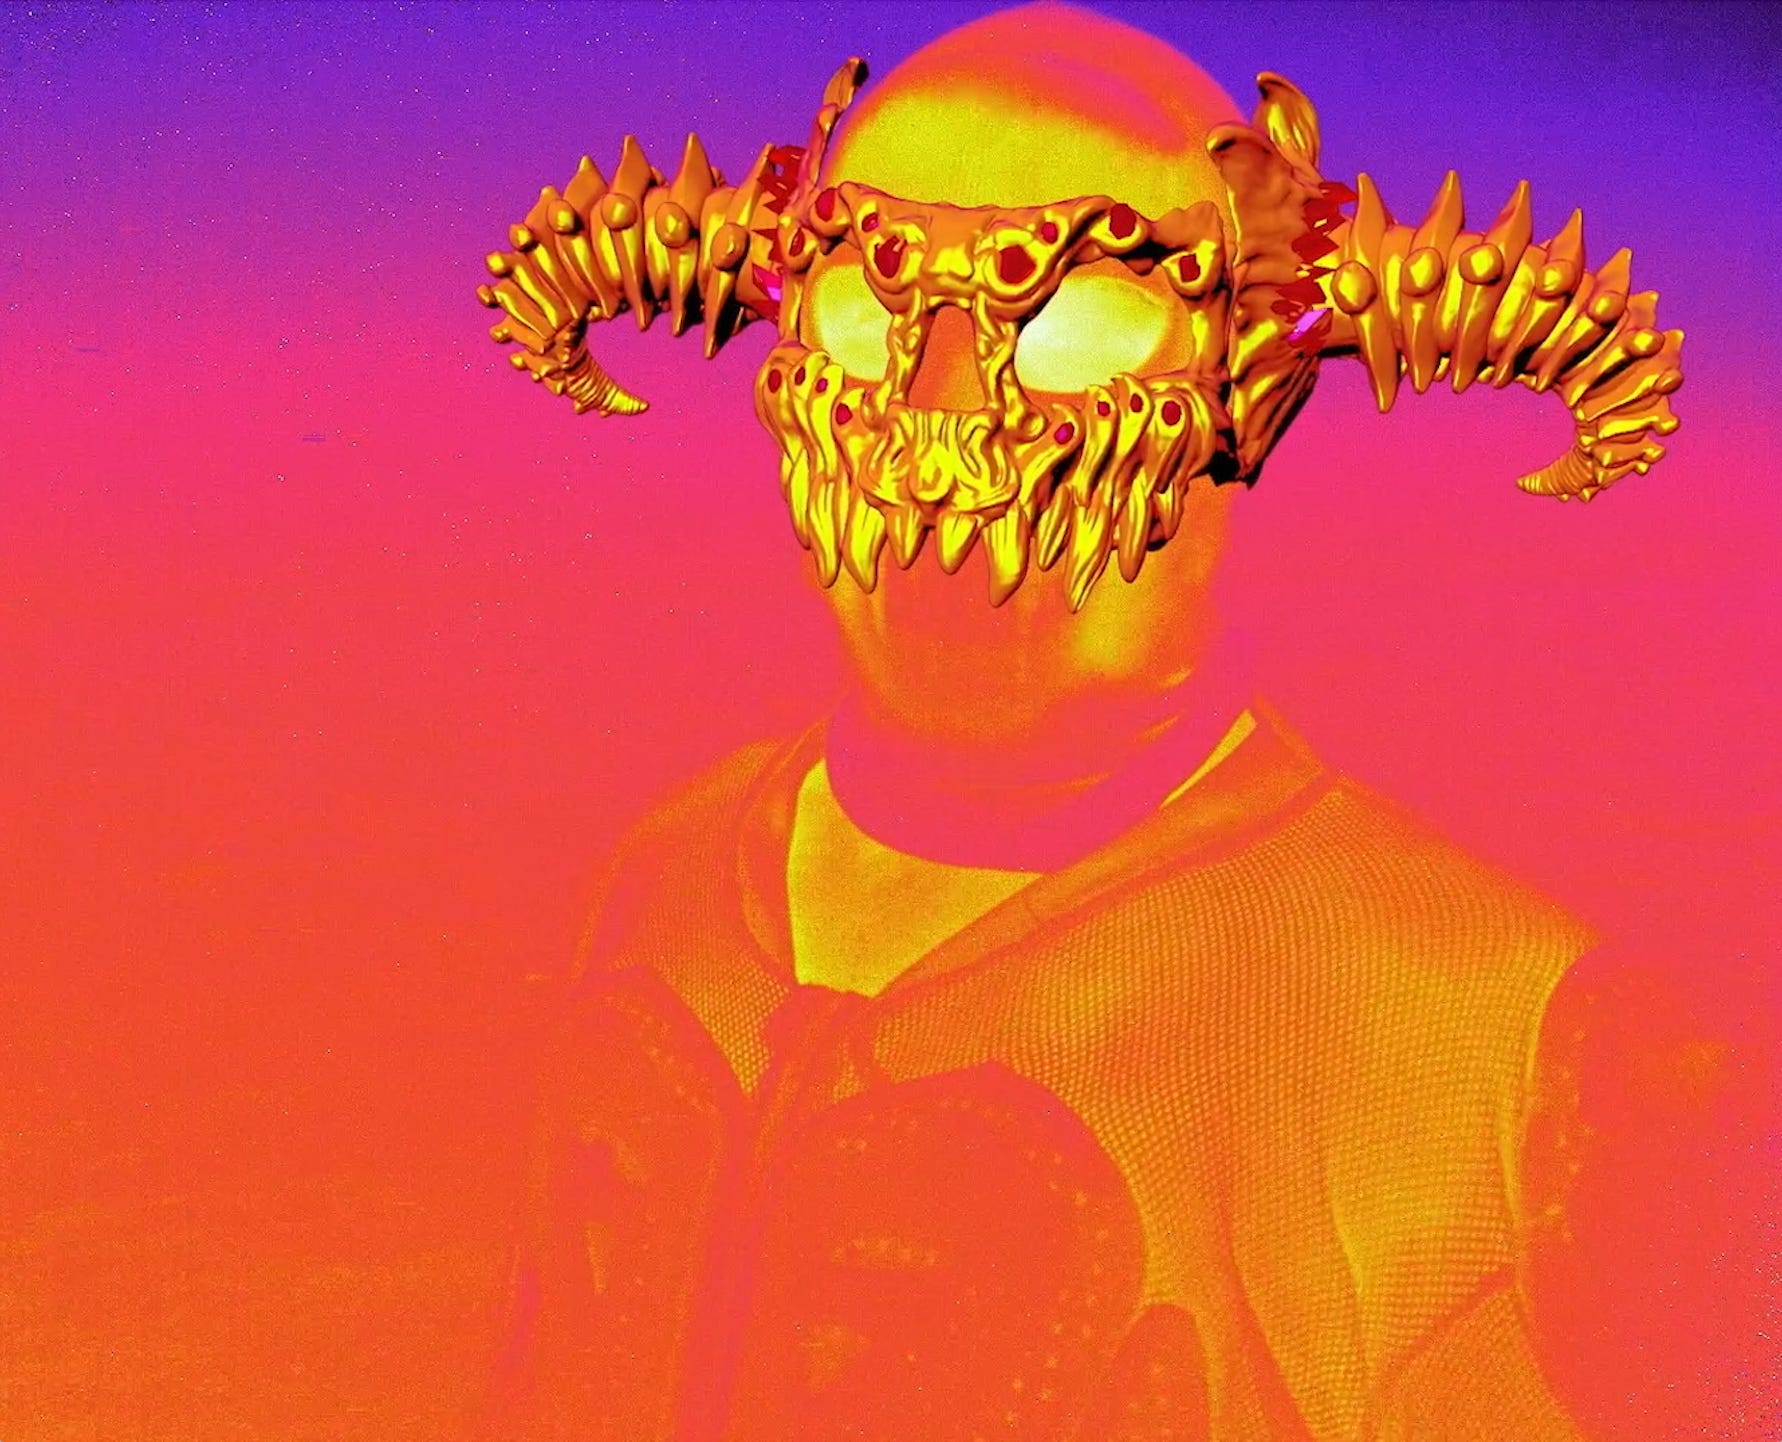 A hypercolor shot of a guy with an animated monster skull imposed on his face